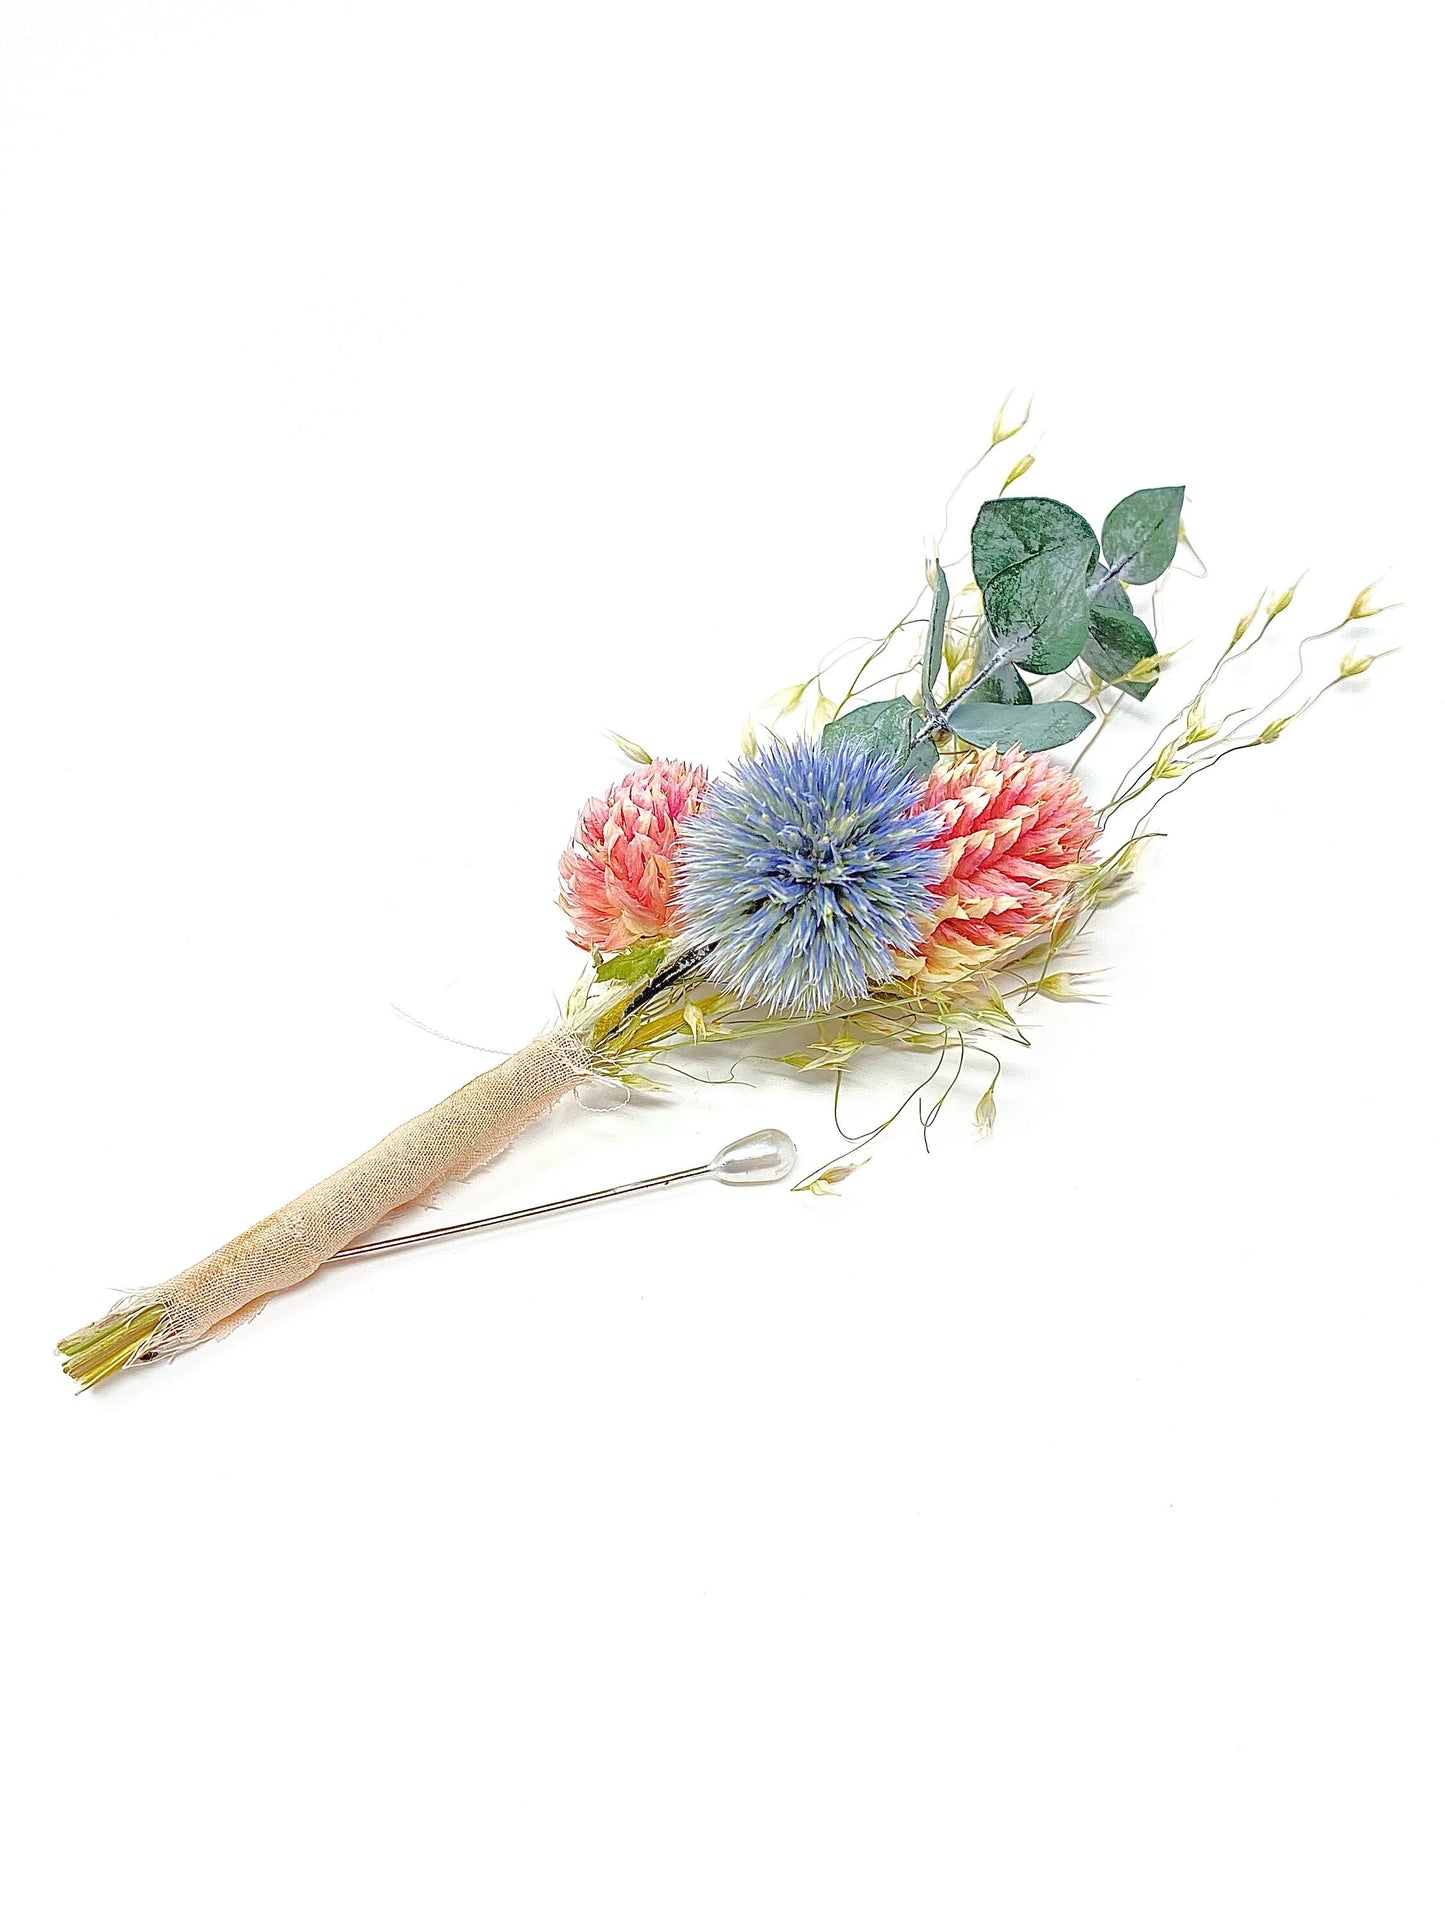 Wedding Boutonniere, Preserved Floral, Dried Flowers, Bridal Accessories, Winter, Decor, Blue and Pink, Eucalyptus, Globe Thistle